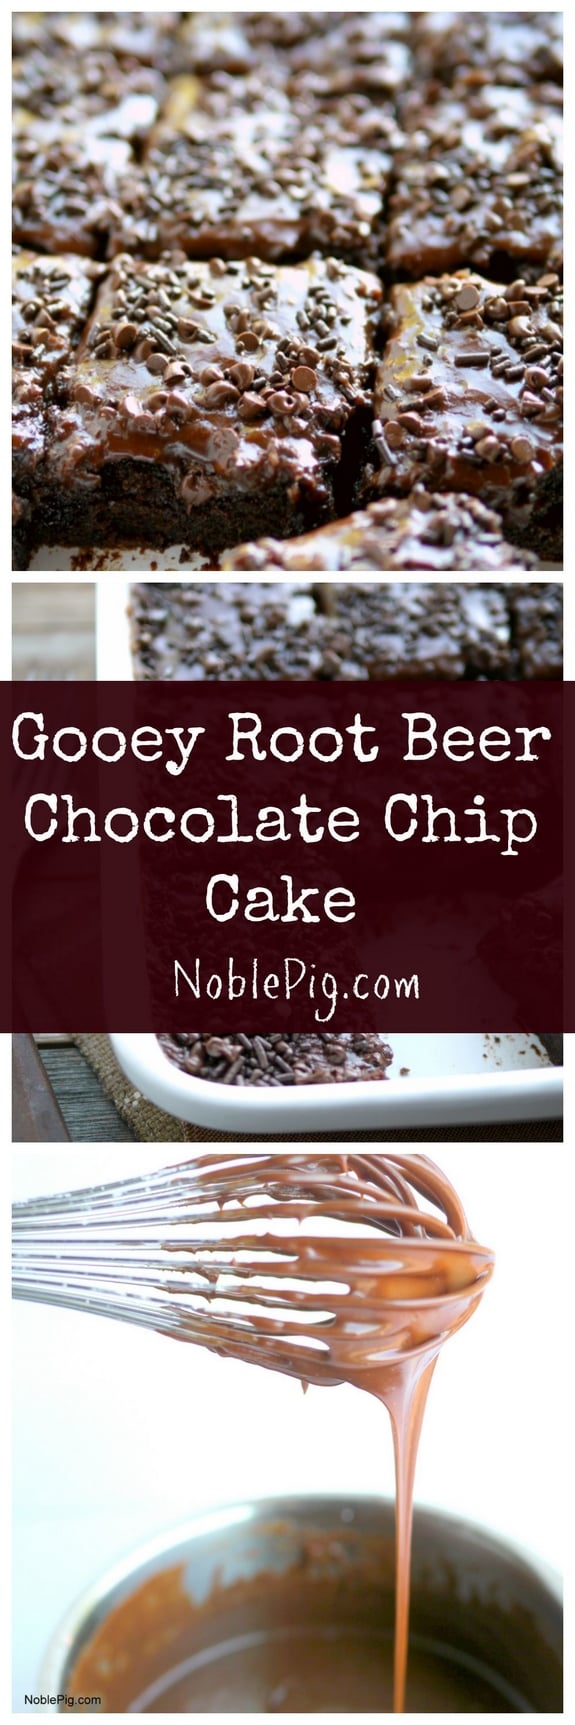 Gooey Root Beer Chocolate Chip Cake from NoblePig